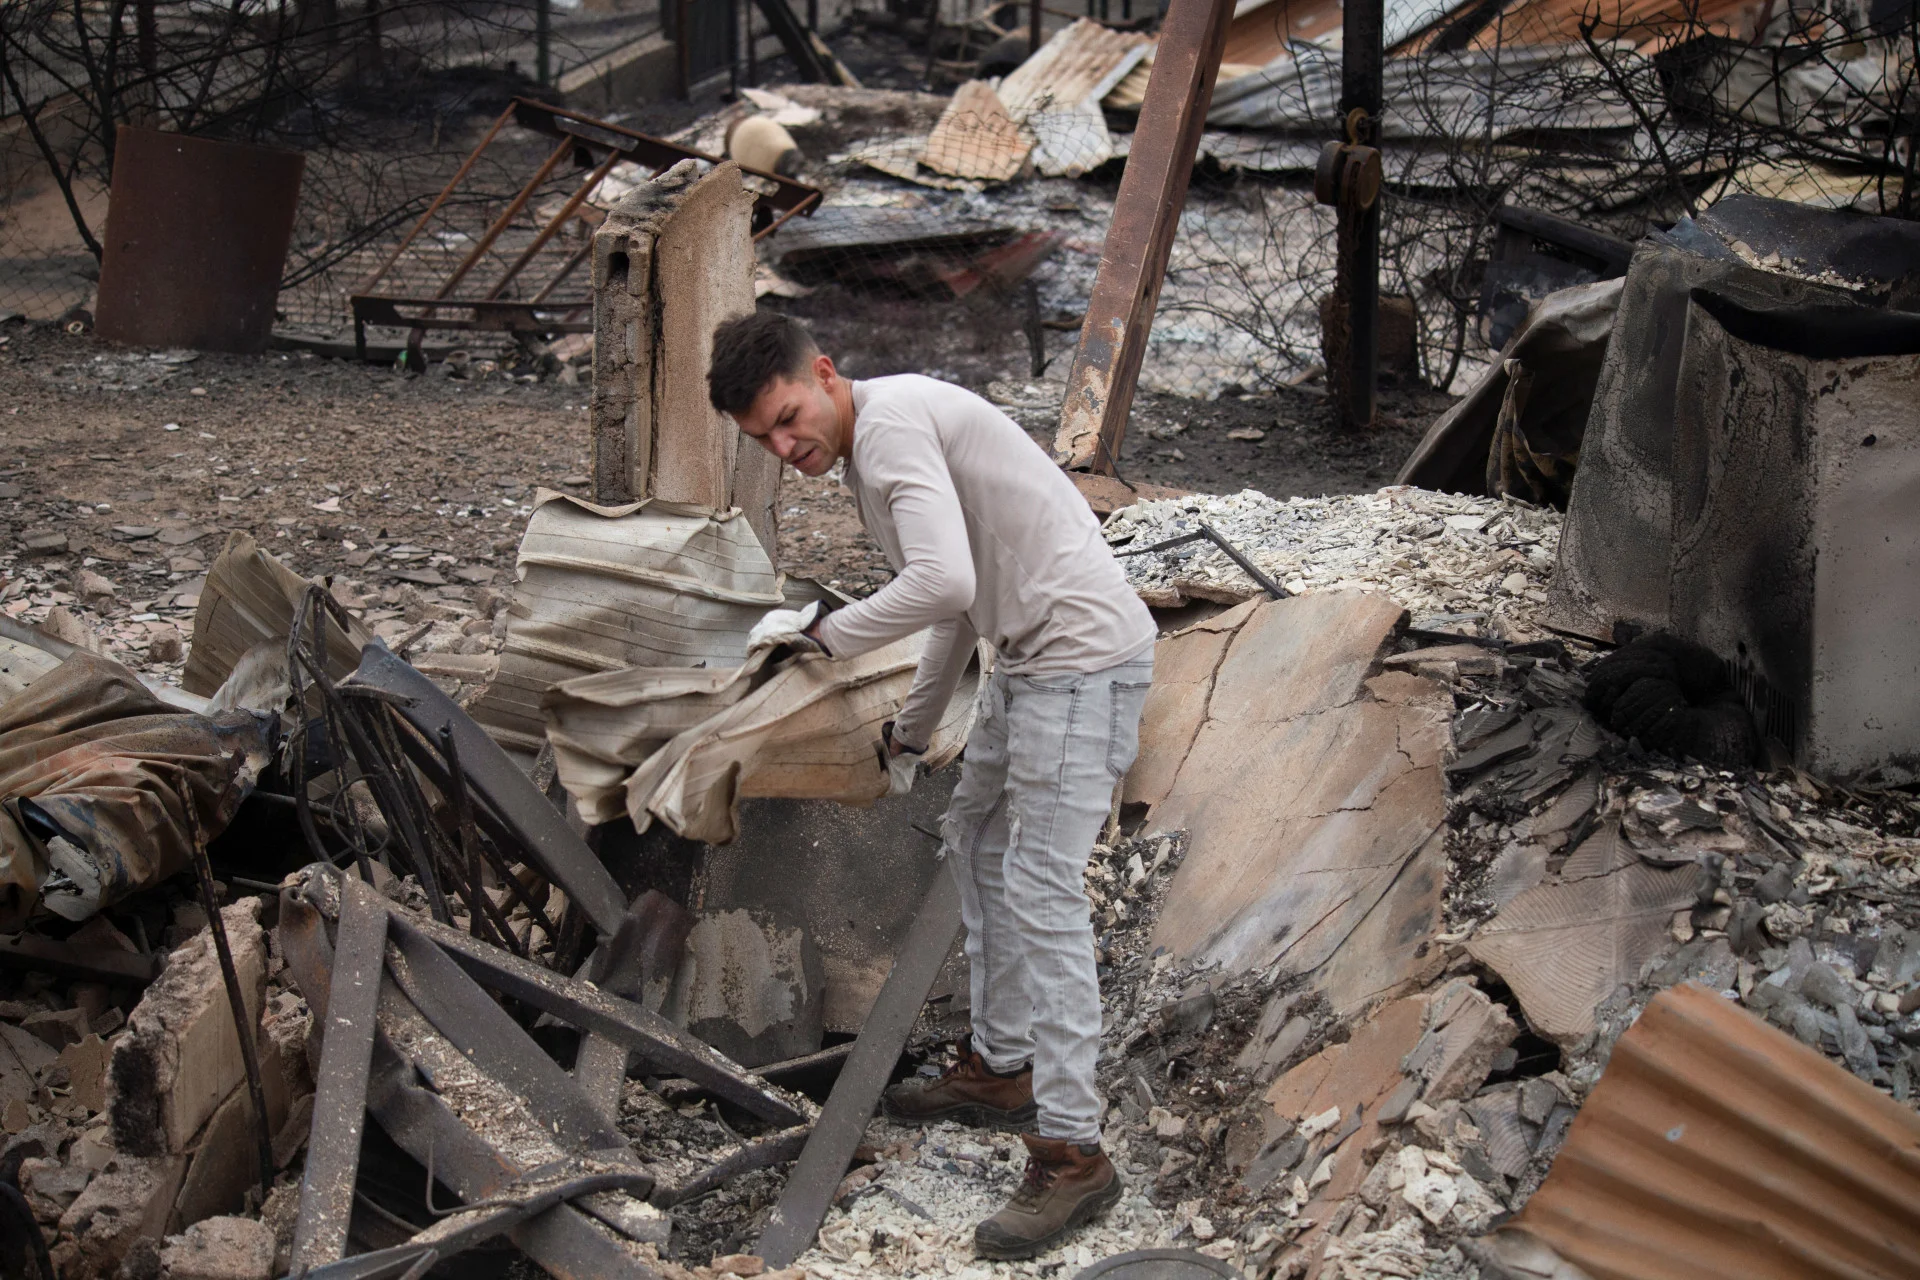 Forest fires kill 123 in Chile's worst disaster since 2010 earthquake